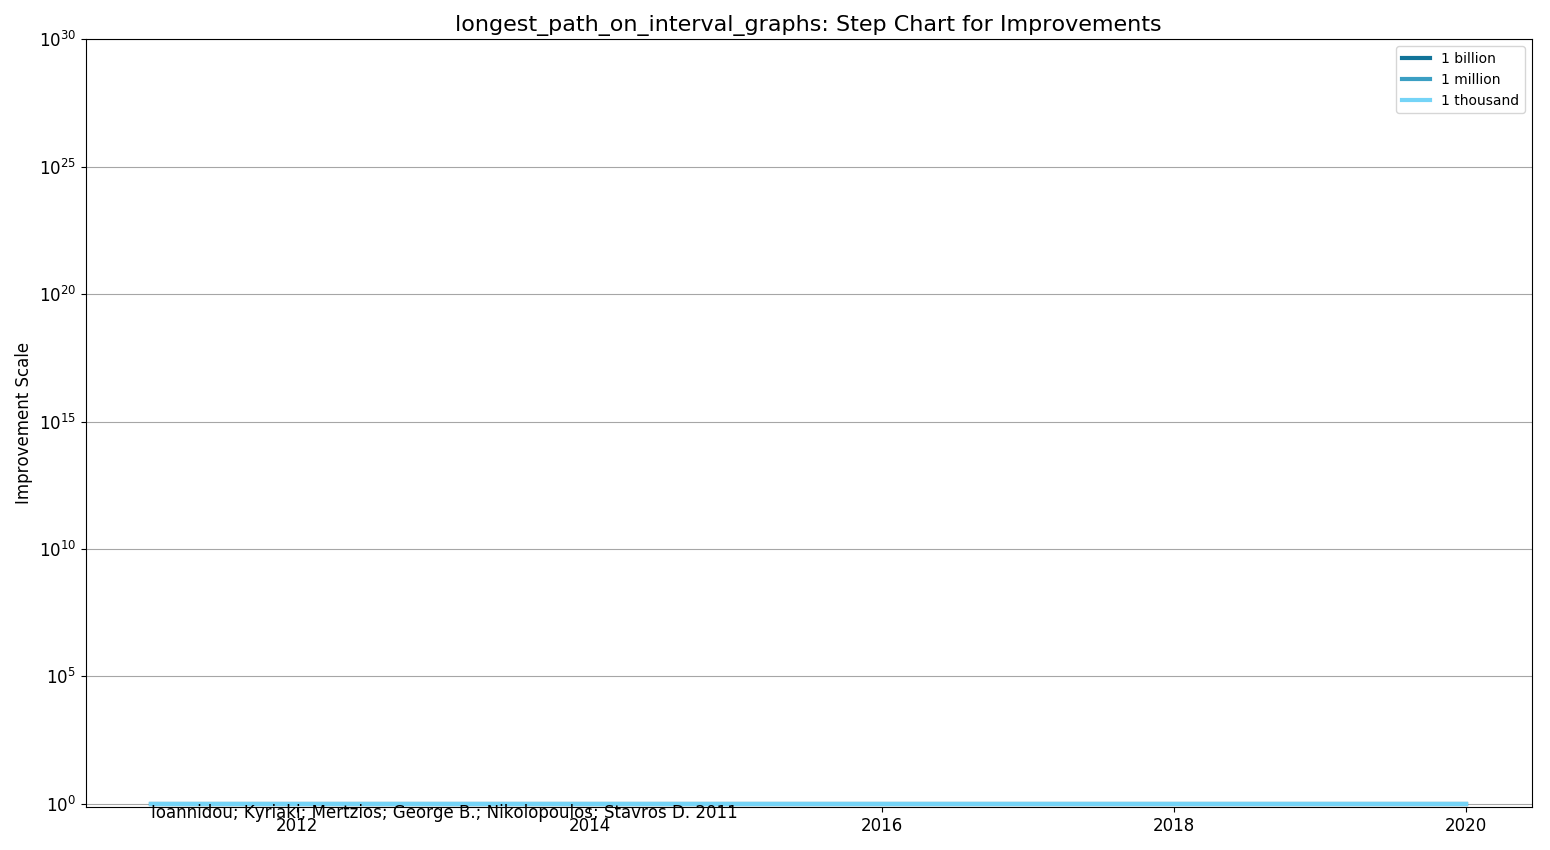 Longest path on interval graphsStepChart.png